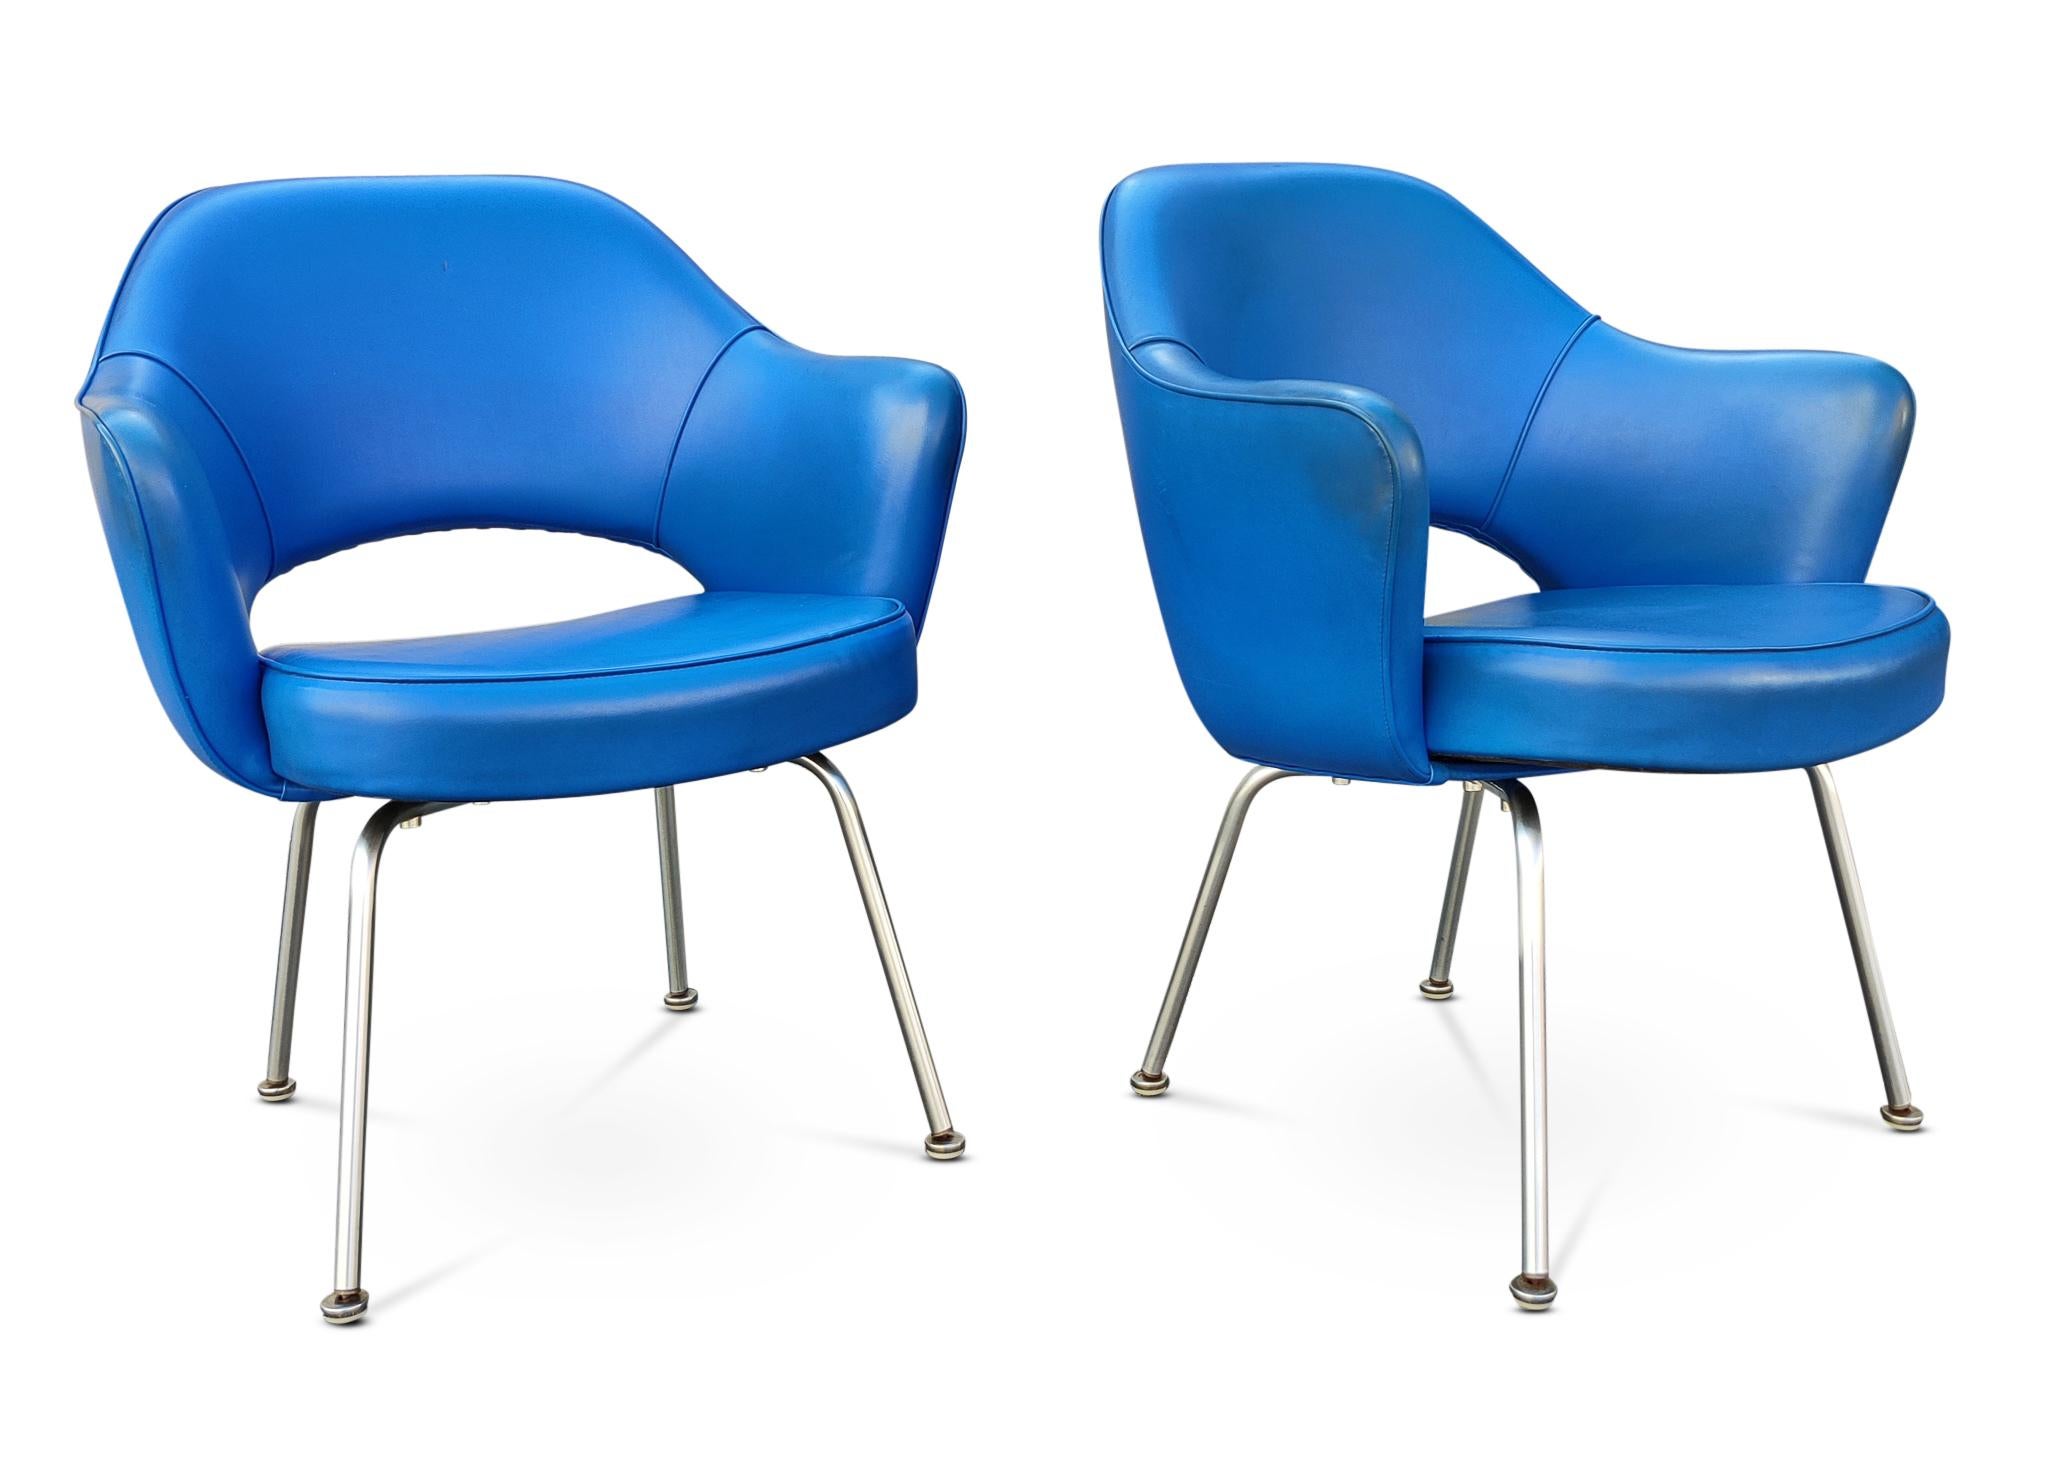 Executive armchairs, pair, designed in 1950 by Eero Saarinen for Knoll Associates. These are from the early '50's, both are in fine, clean condition, supple, cushy and ready to use. The original blue vinyl is soft and comfortable, with a couple